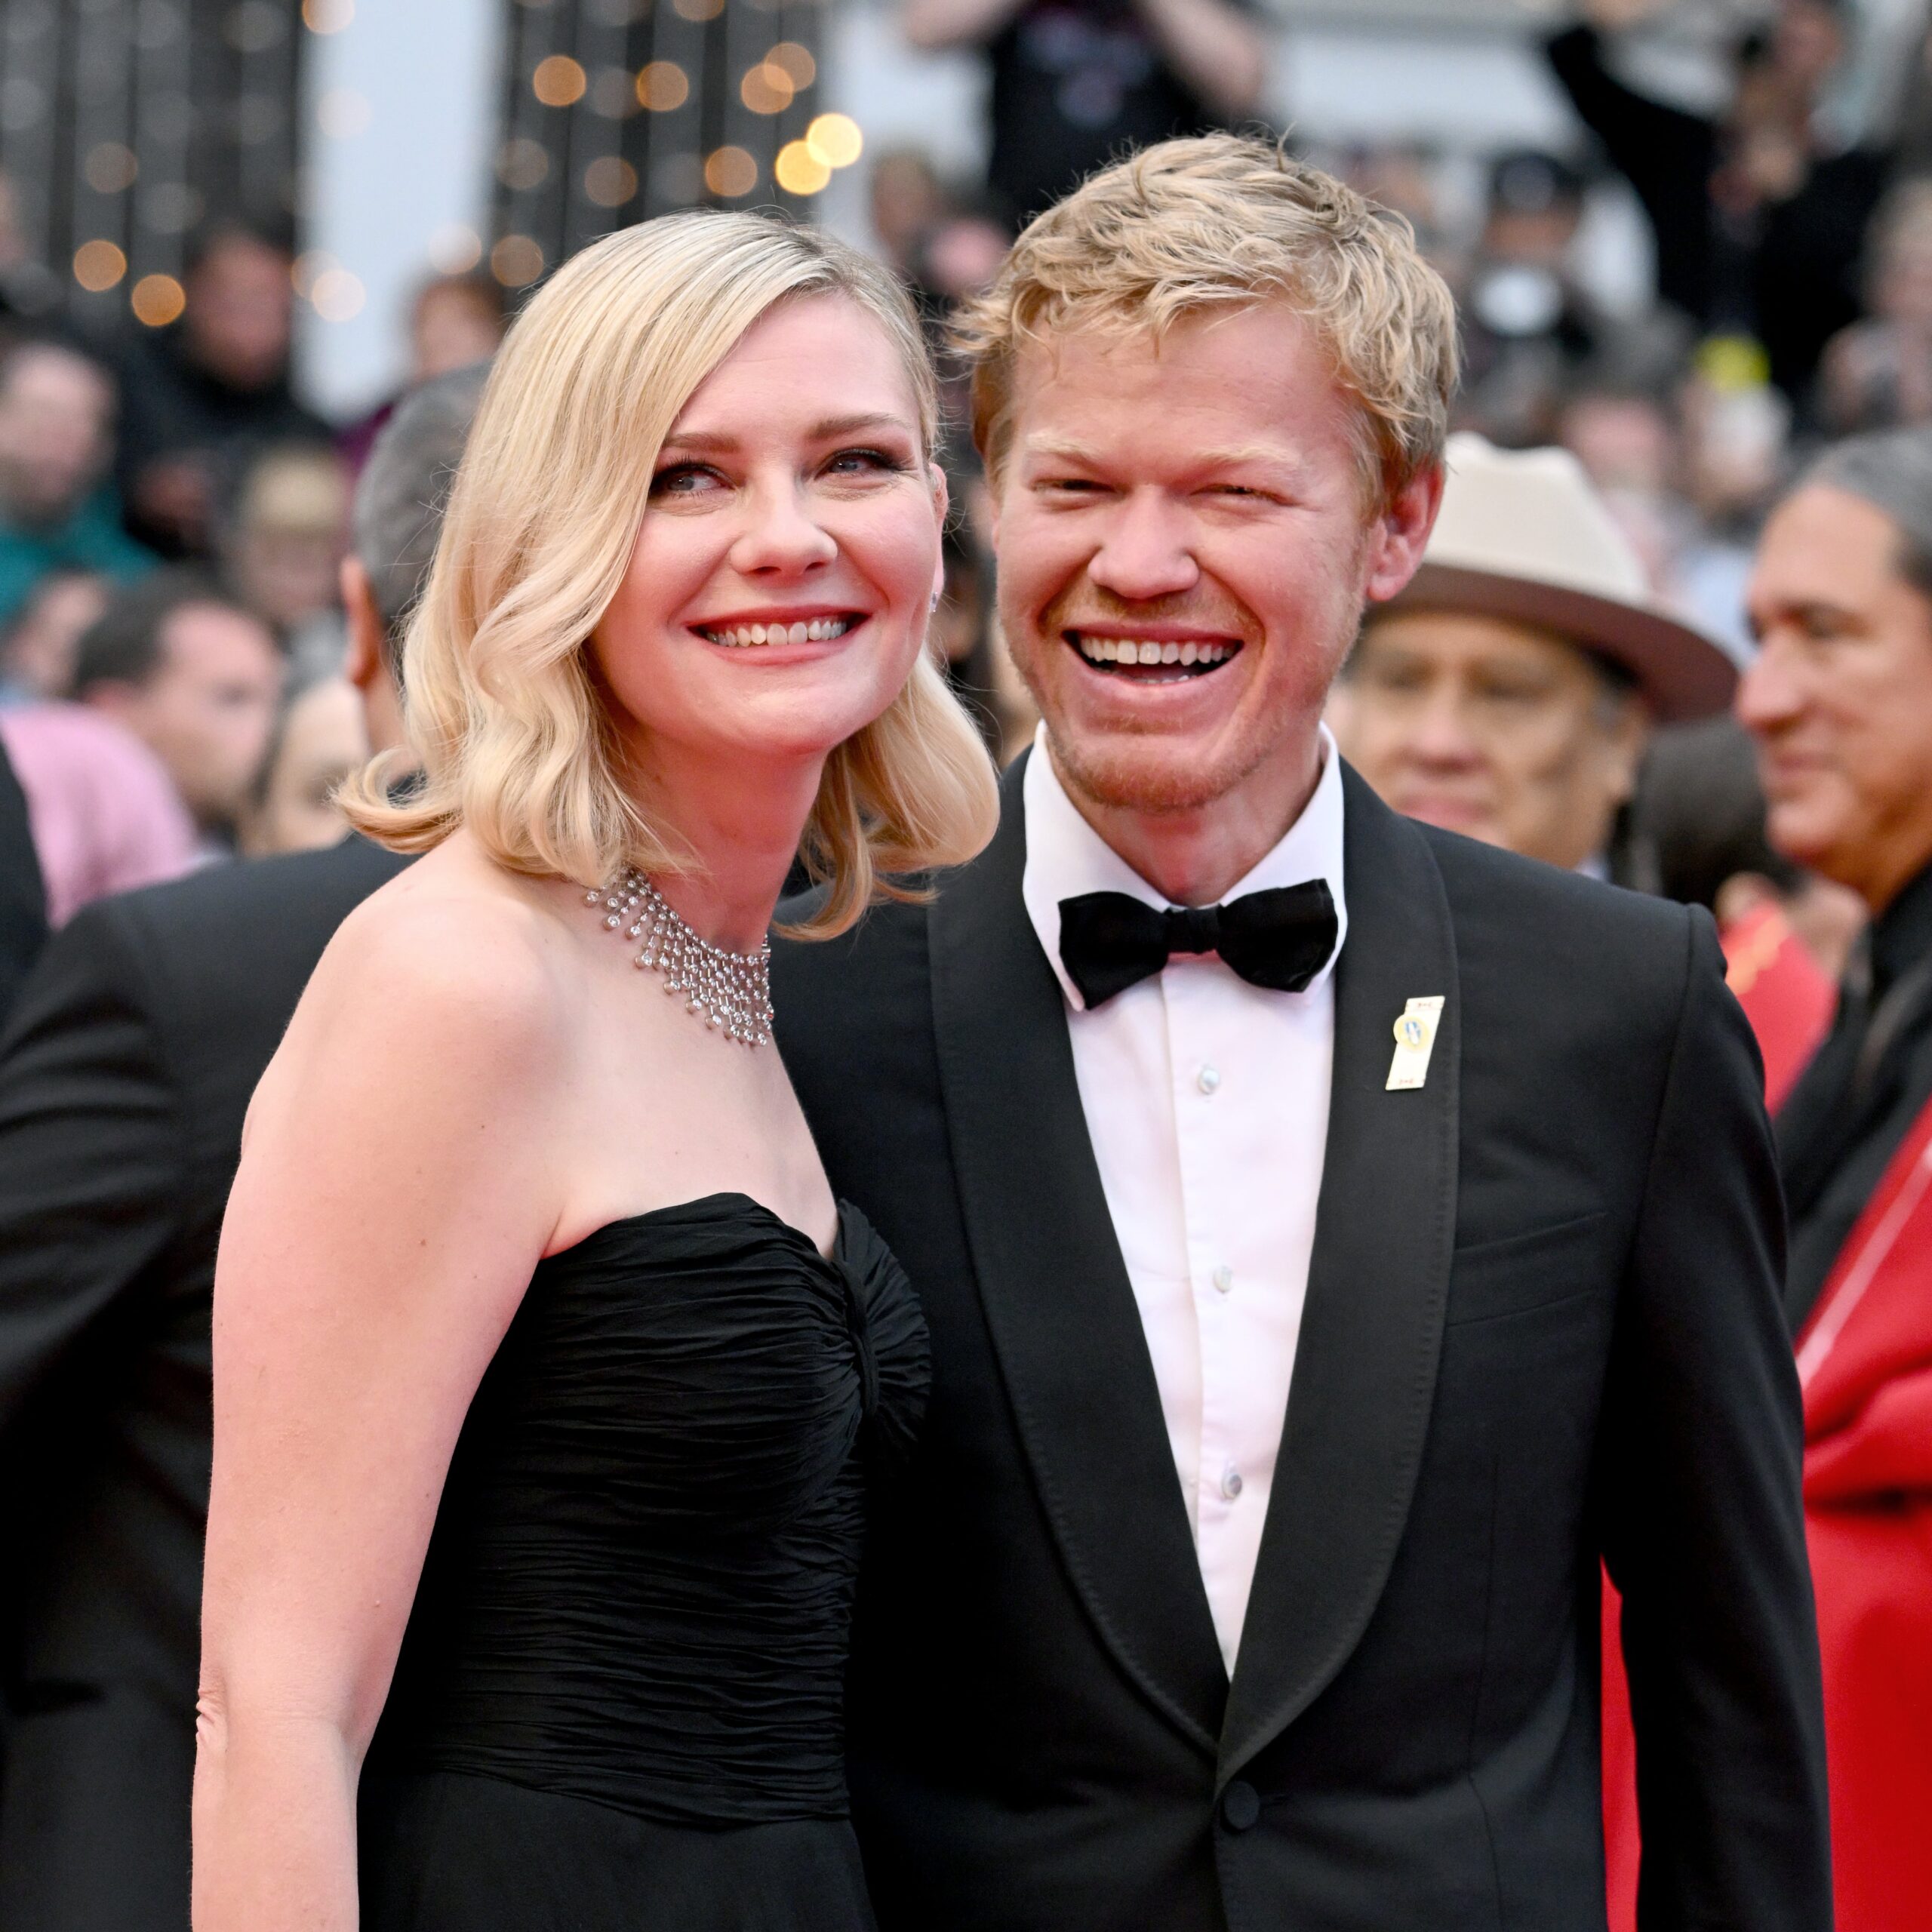 Kirsten Dunst and Jesse Plemons Bring Their Low-Key Romance to Cannes ...